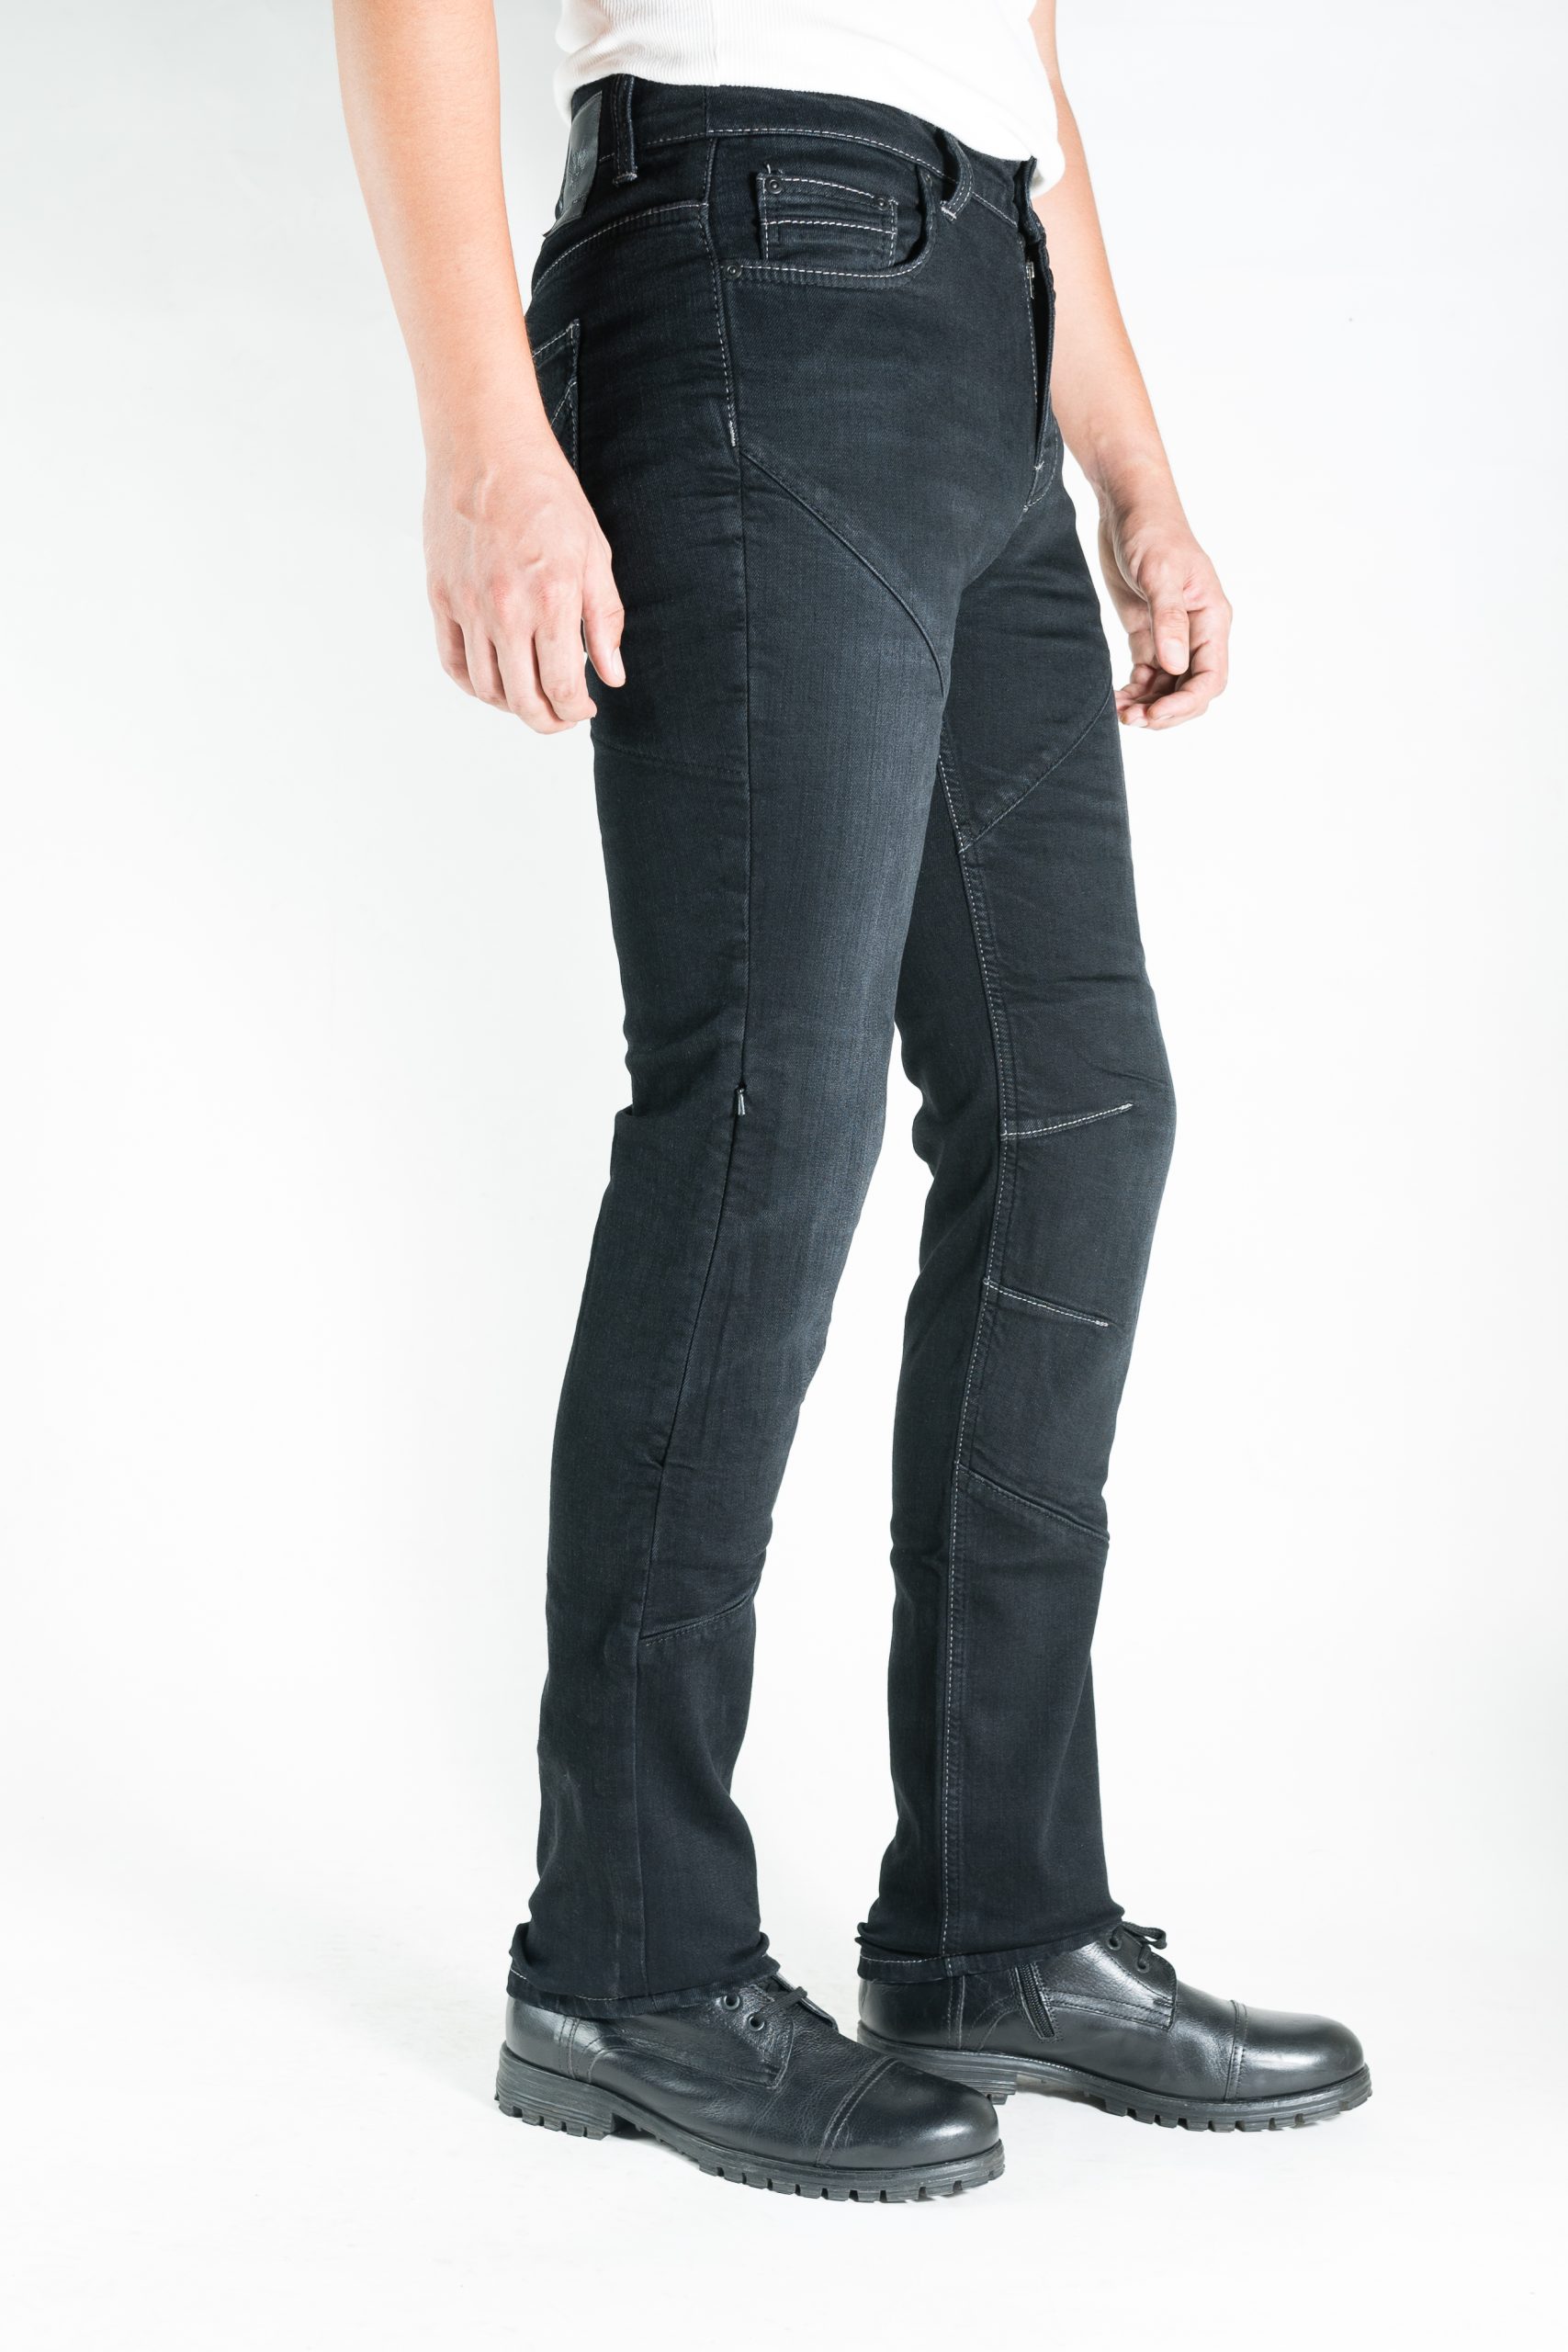 MISTRAL – Motorcycle Jeans